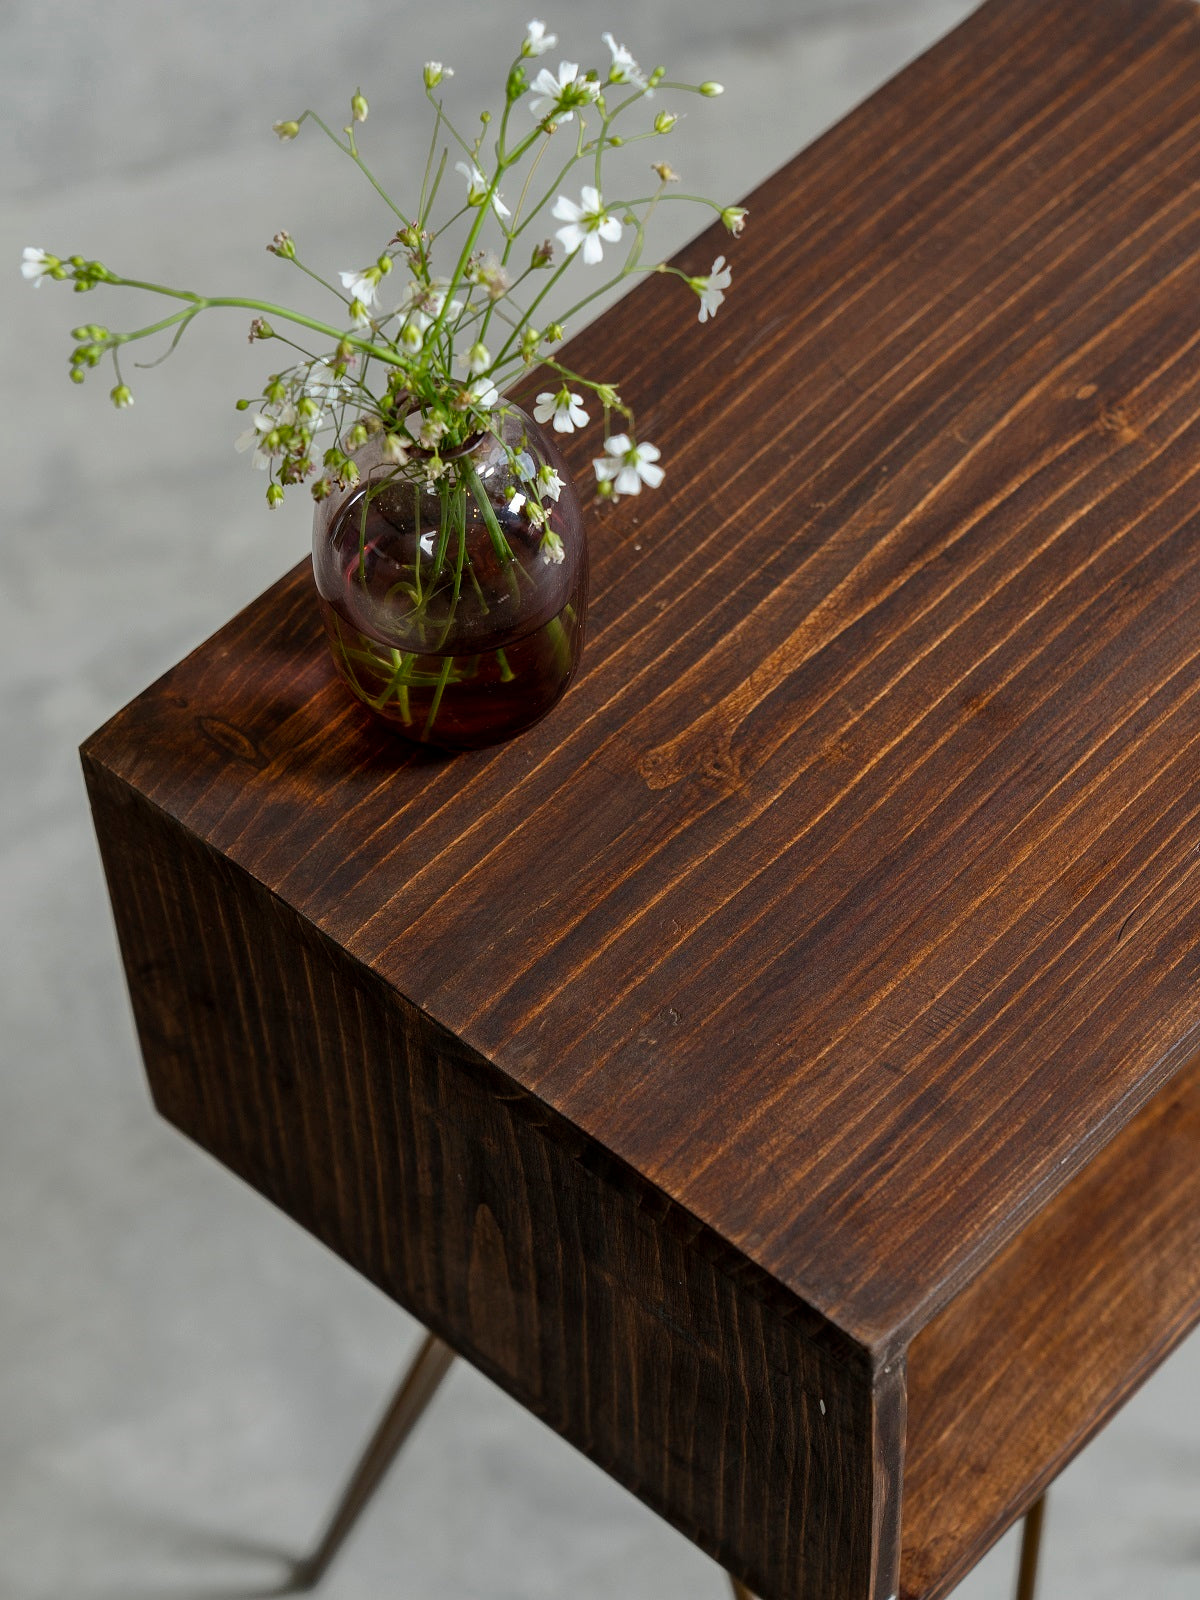 Walnut Tint Amalgam Side Tables, Wooden Tables, Bedside Tables, End Tables, Living Room Decor by A Tiny Mistake